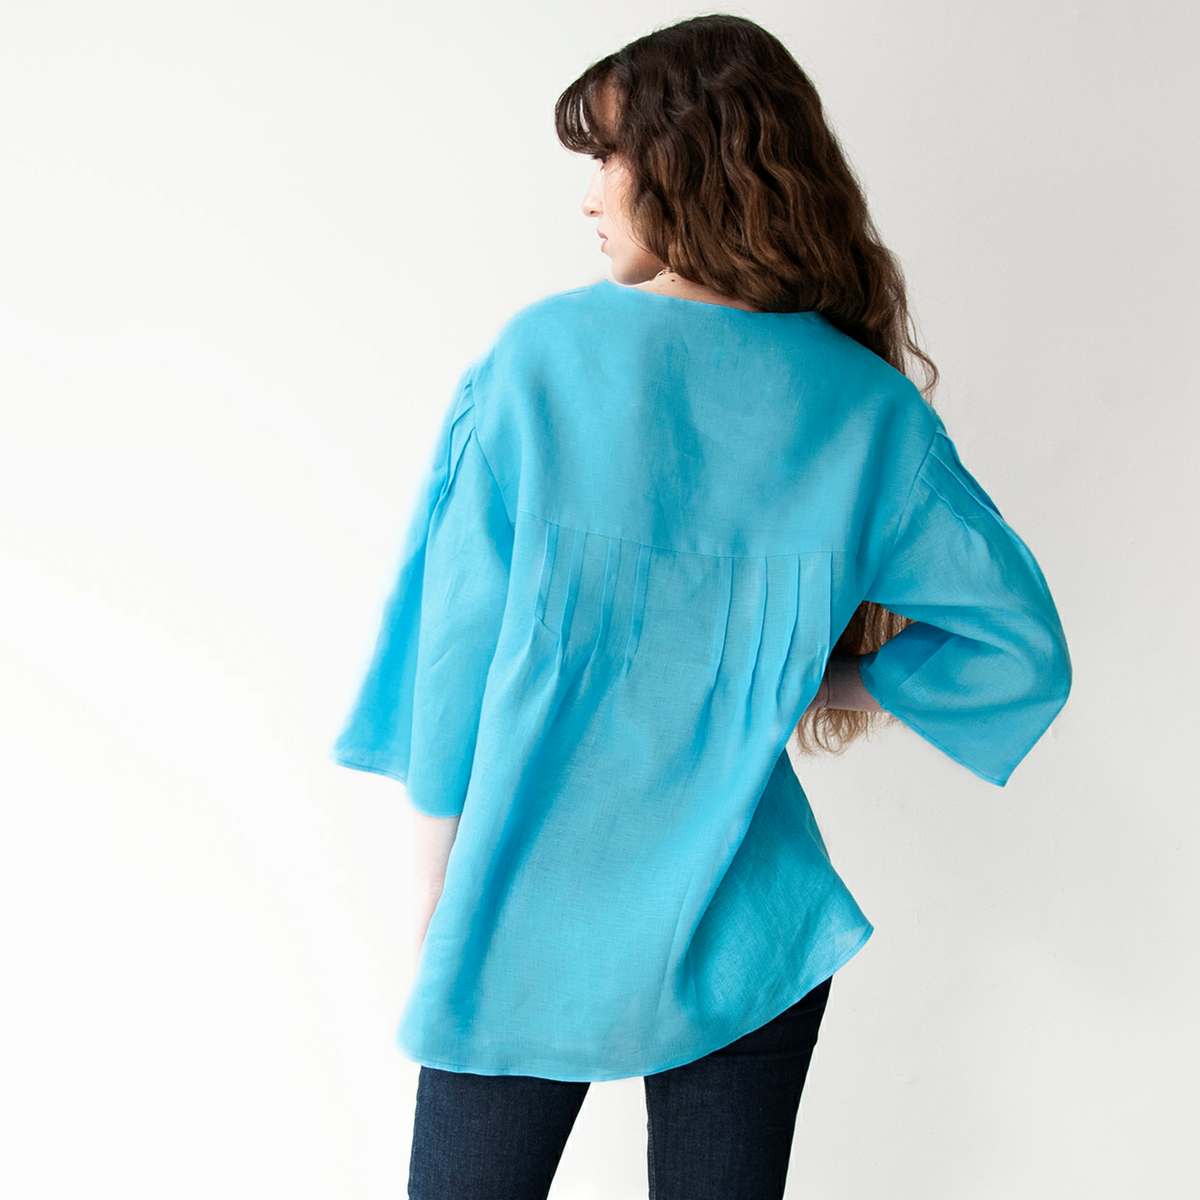 Women's 100% Linen Shirt Style JOANIE Turquoise - Made in Ireland